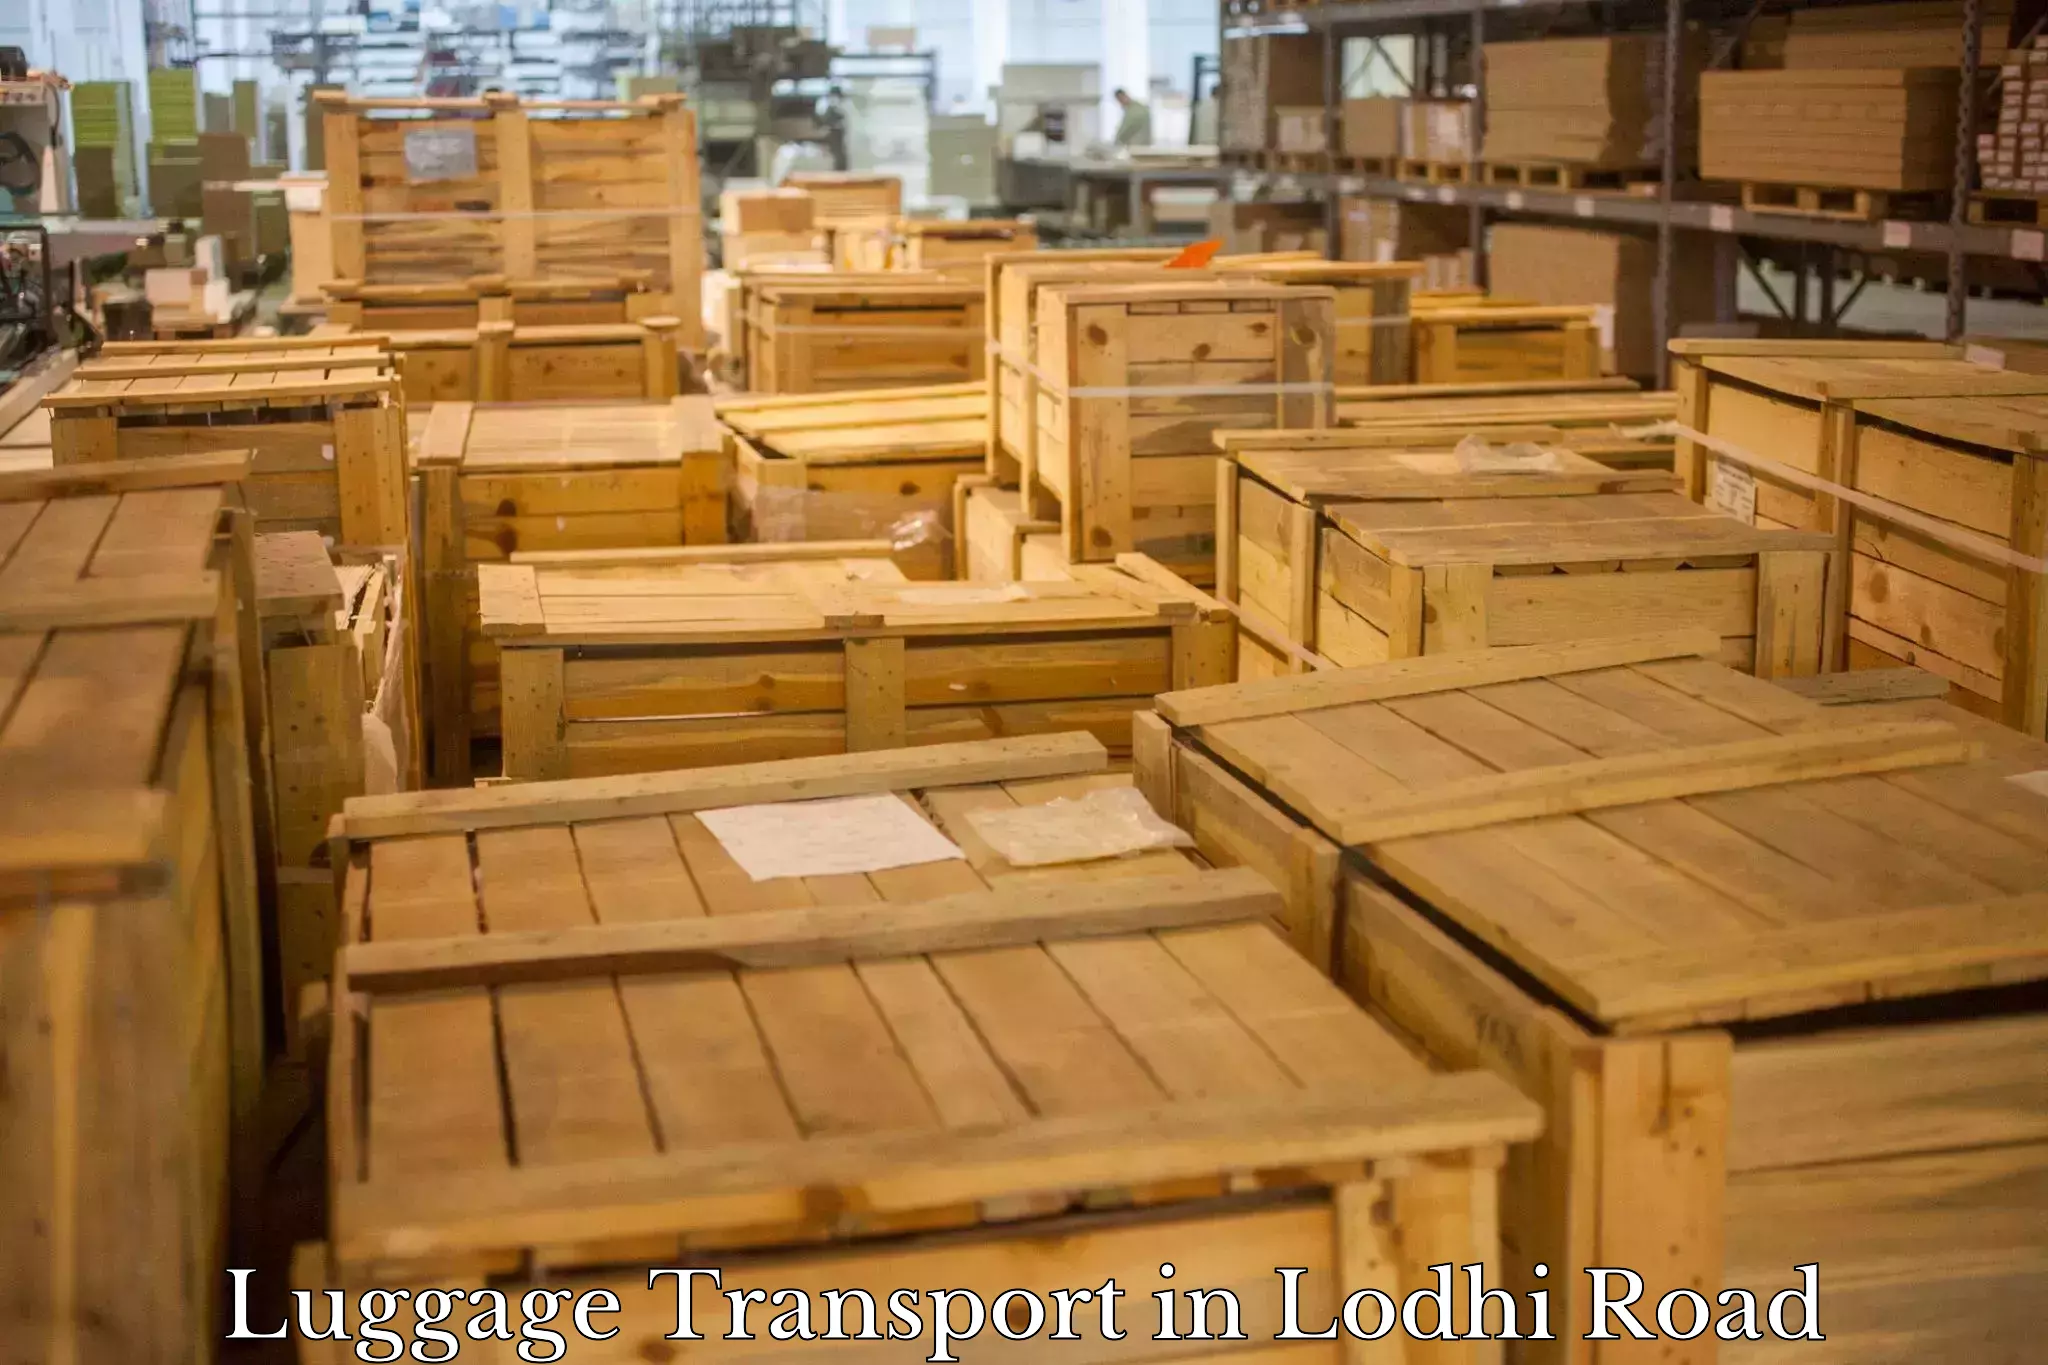 Luggage transport deals in Lodhi Road